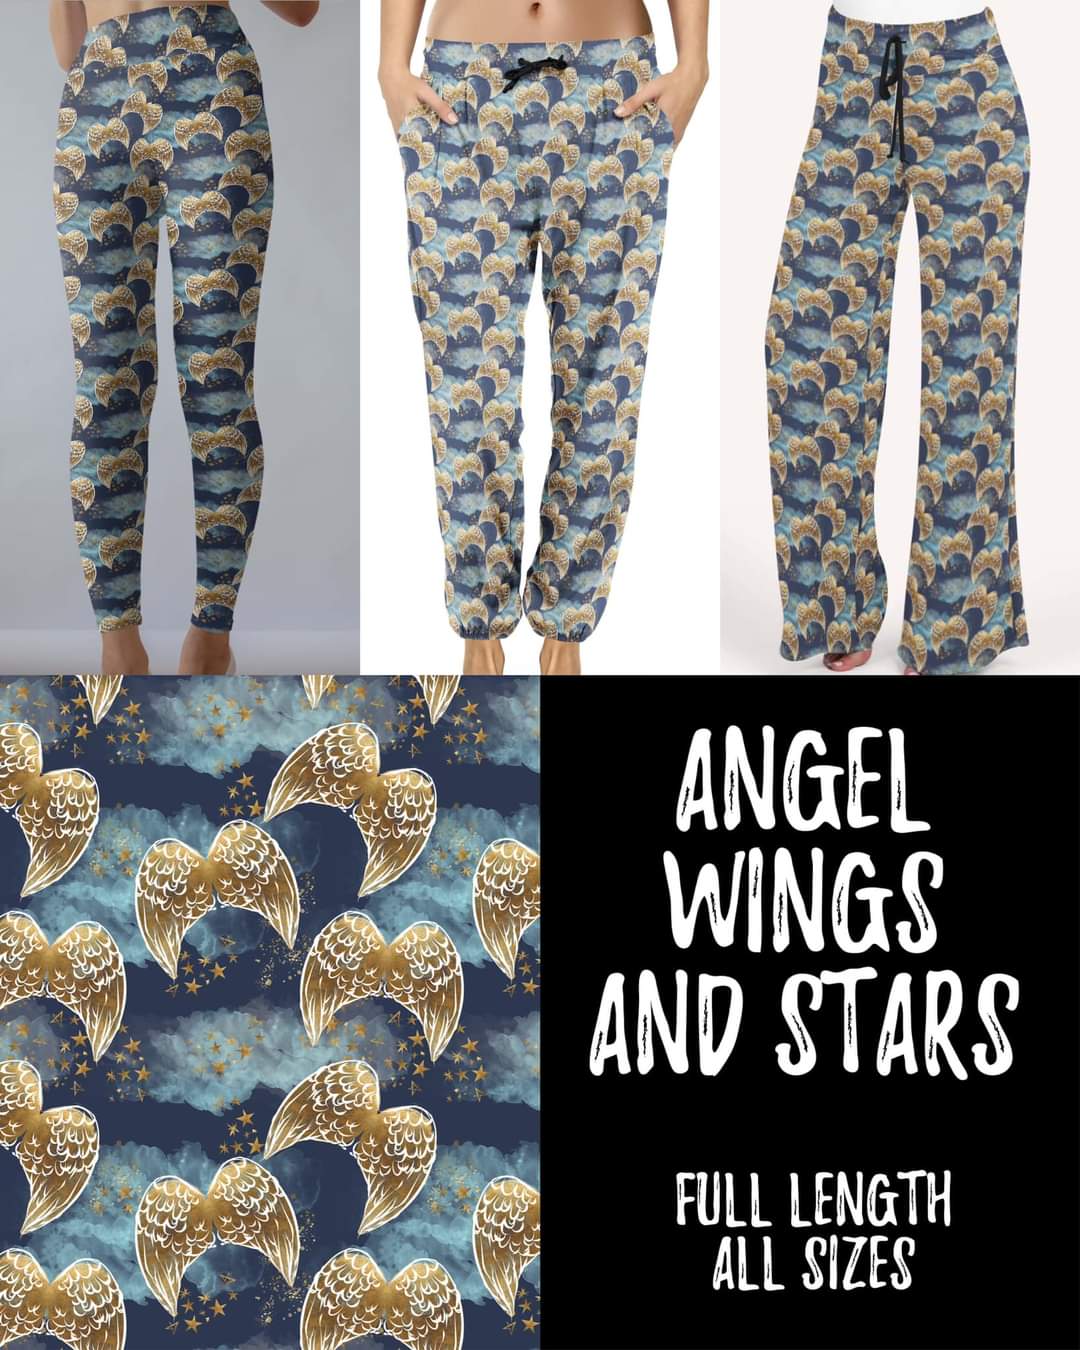 Angel wings and stars